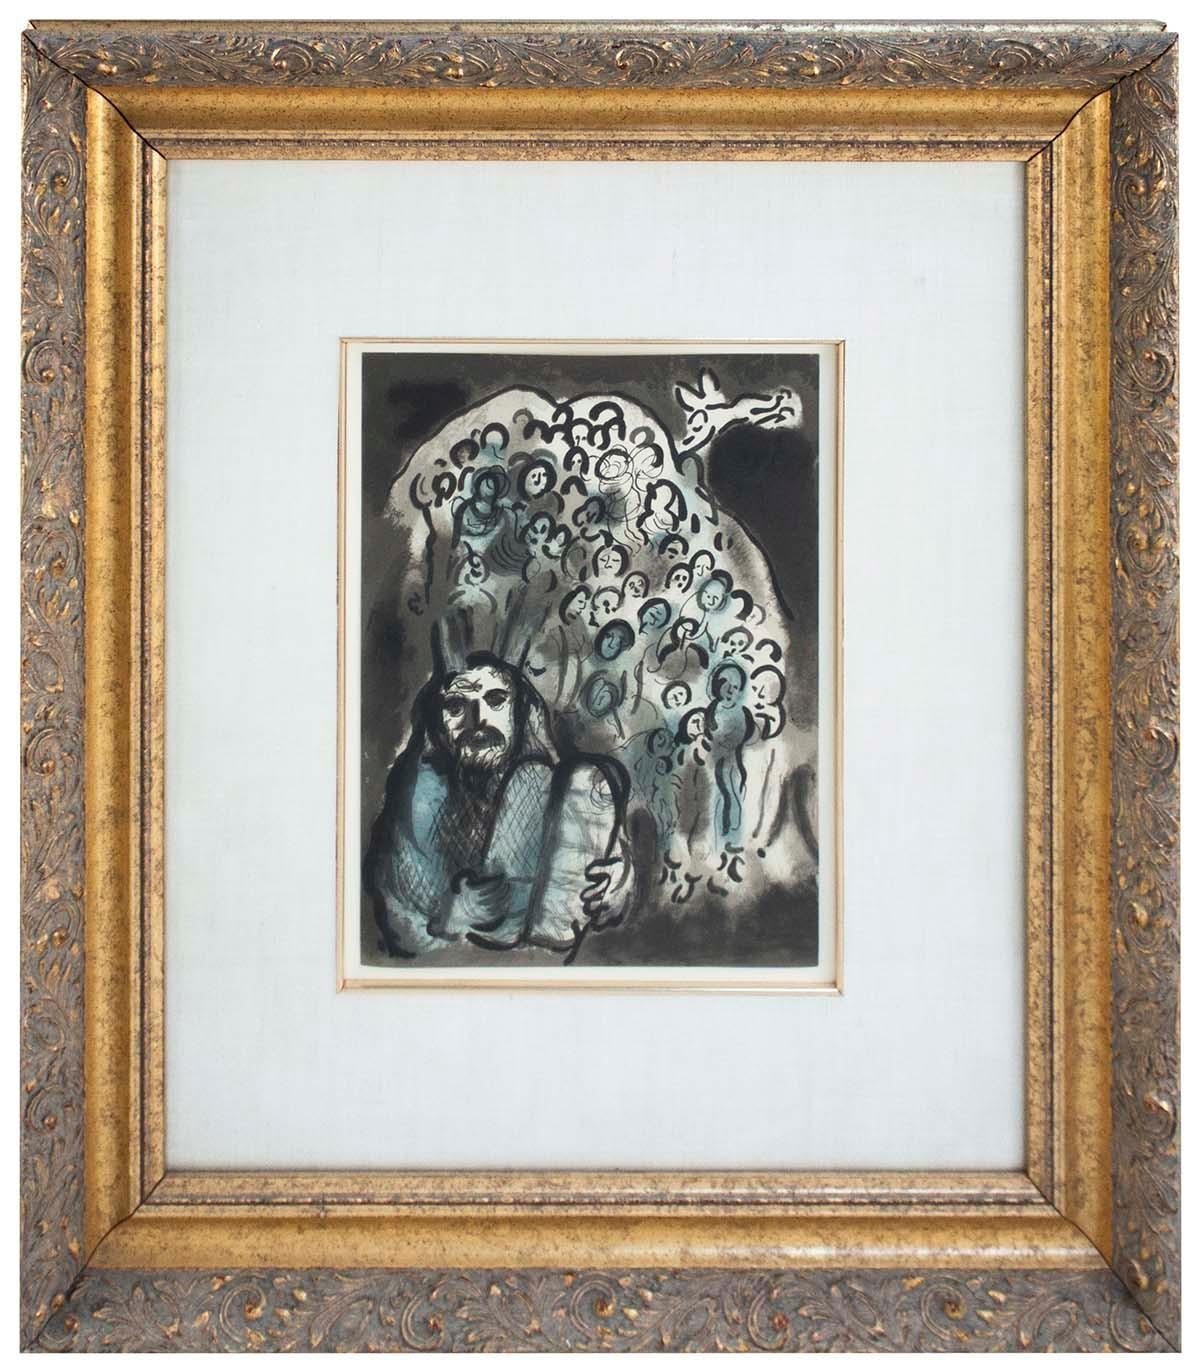 Paper Size: 12.5 x 9.25 inches ( 31.75 x 23.495 cm )
 Image Size: 12.5 x 9.25 inches ( 31.75 x 23.495 cm )
 Framed: Yes
 Condition: A: Mint
 
 Additional Details: The overall outside dimensions are 26 x 23. Currently framed in a gold wood frame with